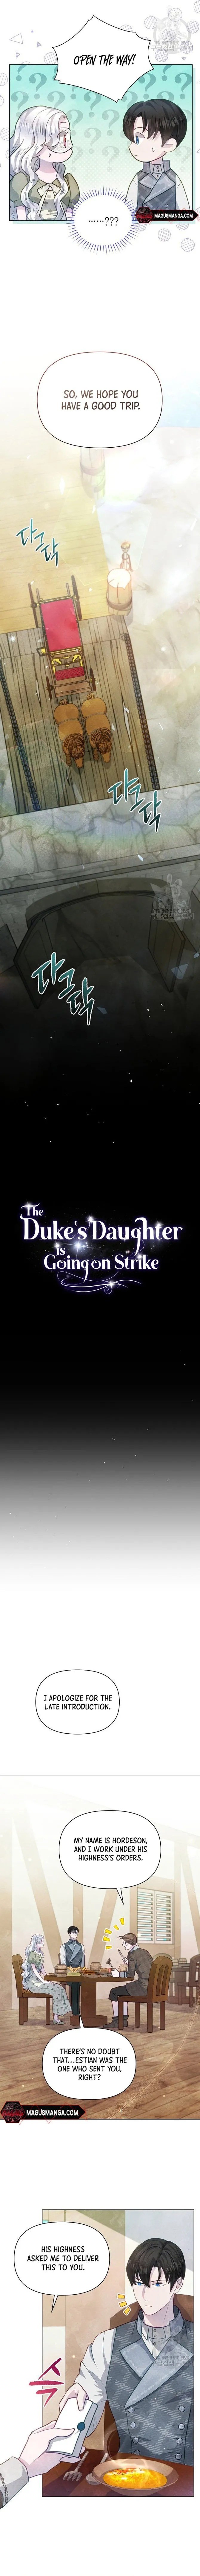 The Duke’s Daughter is Going on Strike chapter 21